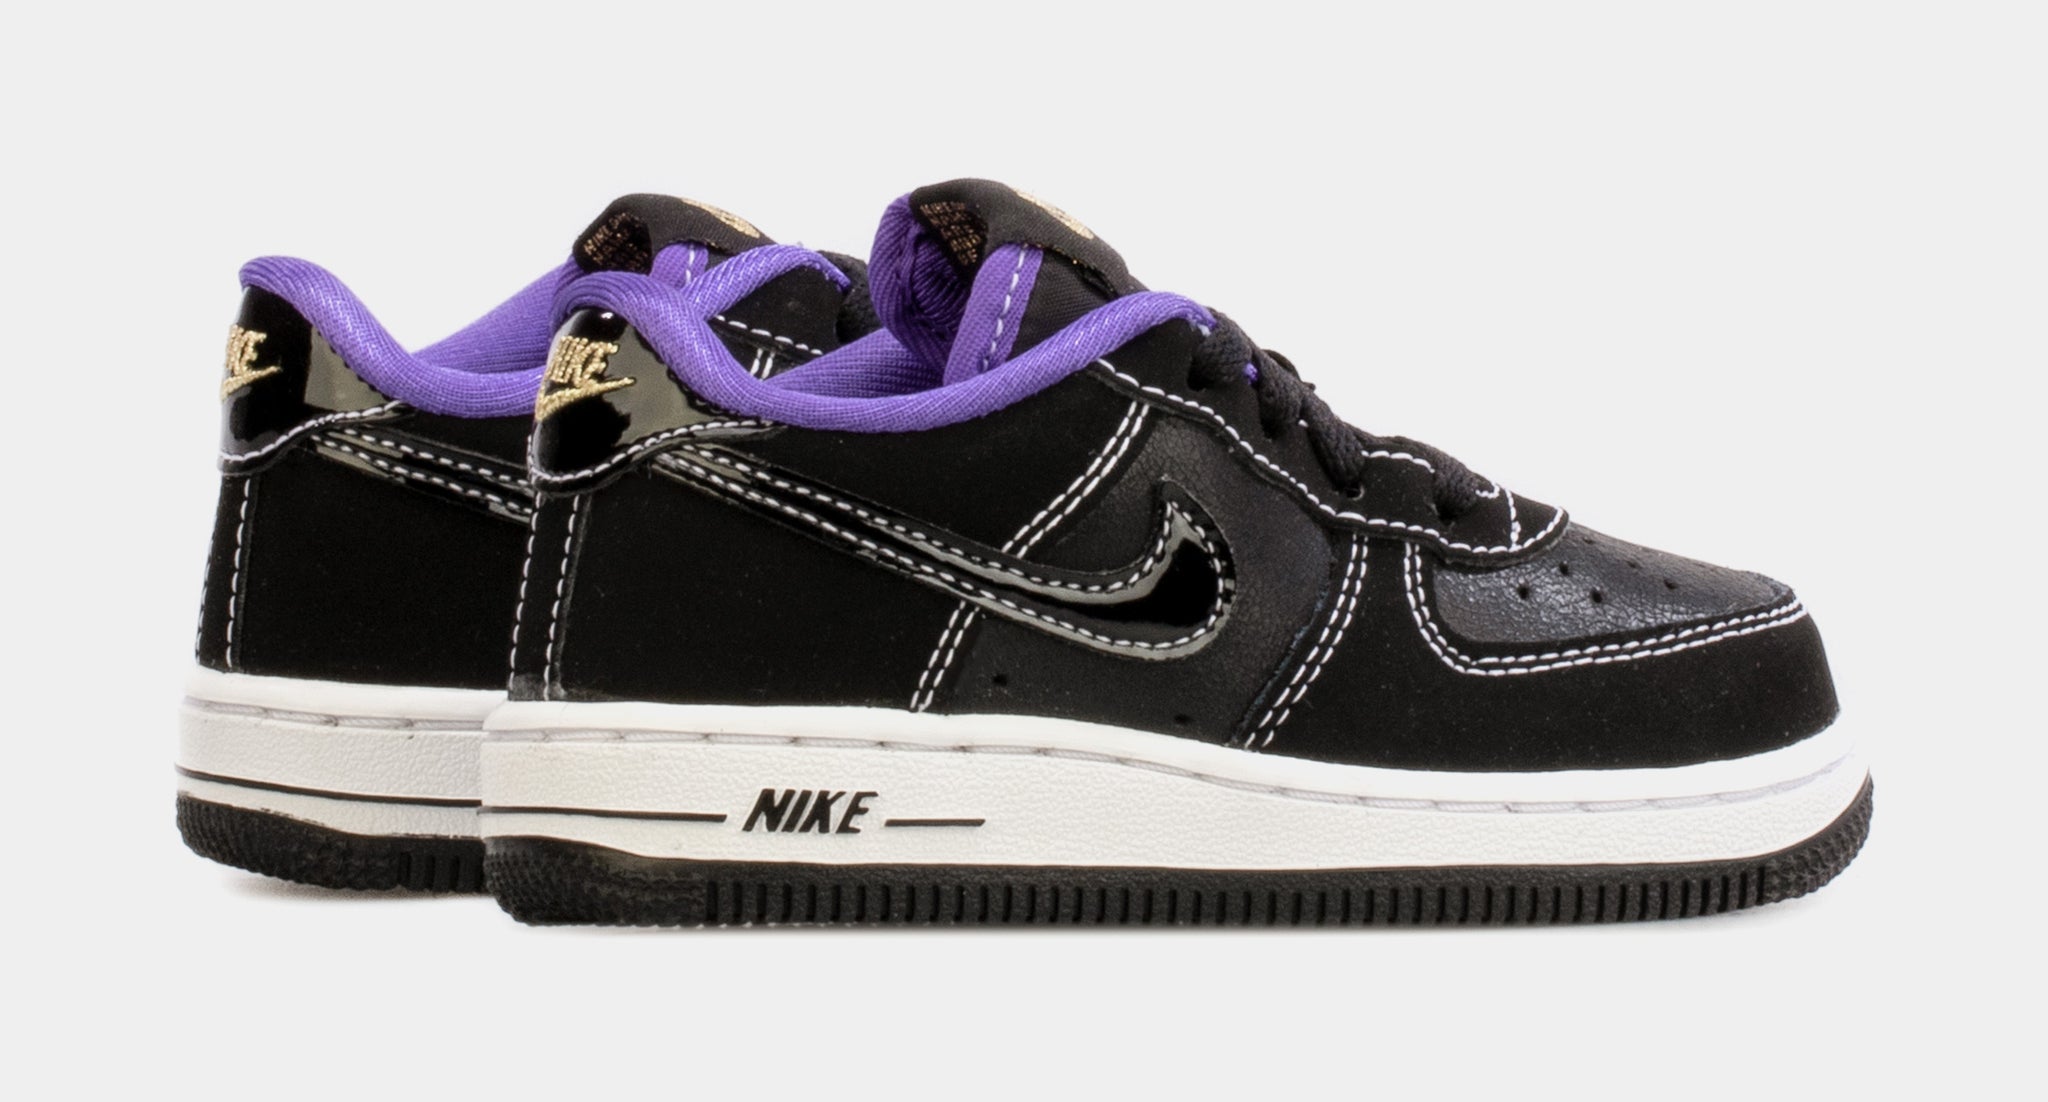 Nike Air Force 1 06 LV8 EMB Infant Toddler Lifestyle Shoes Black Multi  DQ3659-001 – Shoe Palace